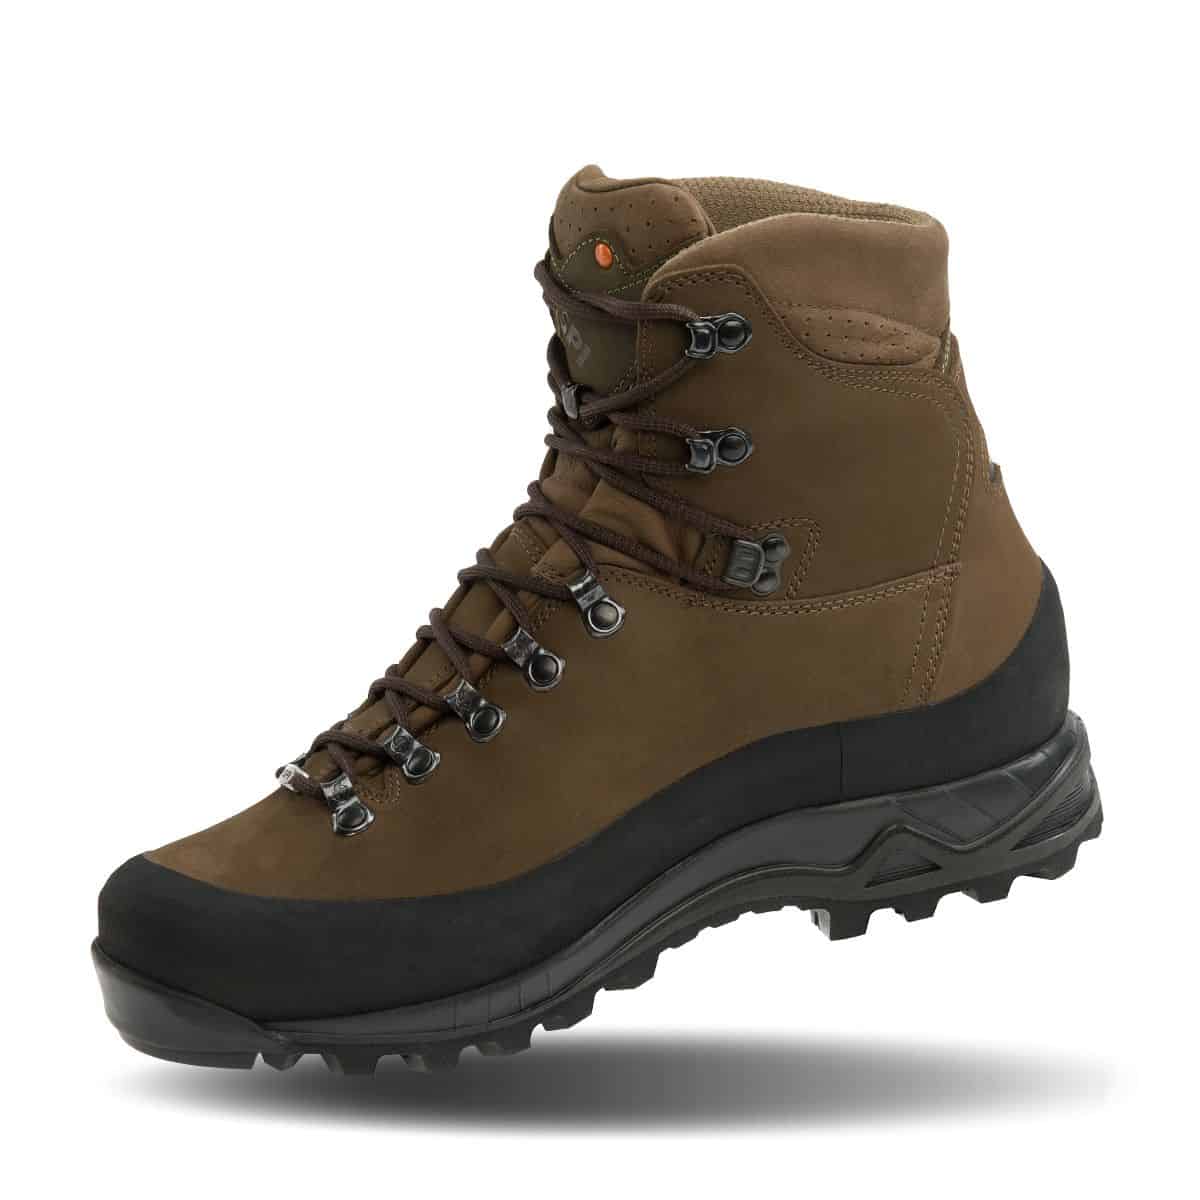 Crispi Nevada Boots - Non Insulated Hunting Boot Left